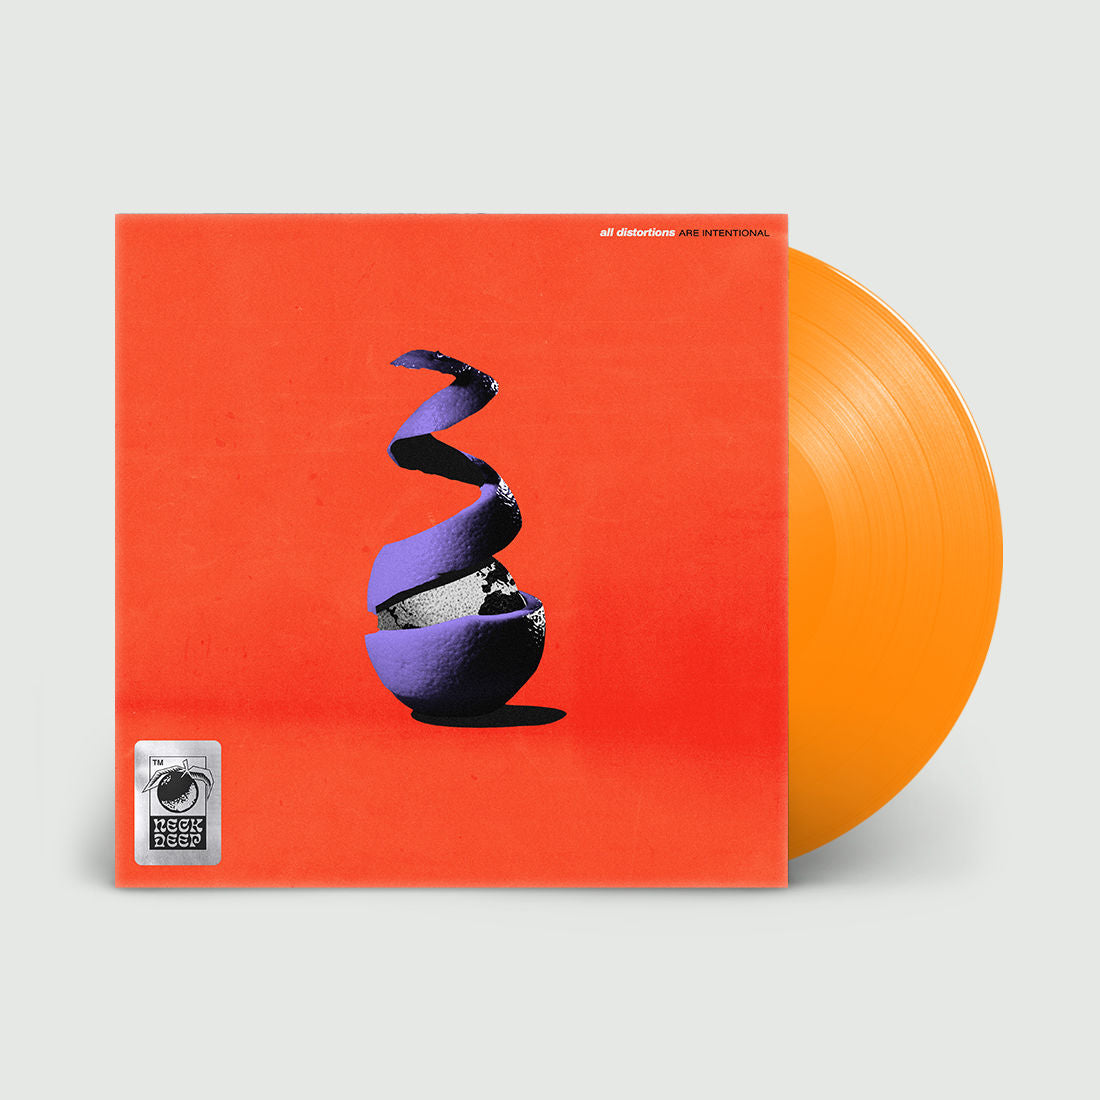 All Distortions Are Intentional: Limited Edition Orange Vinyl LP